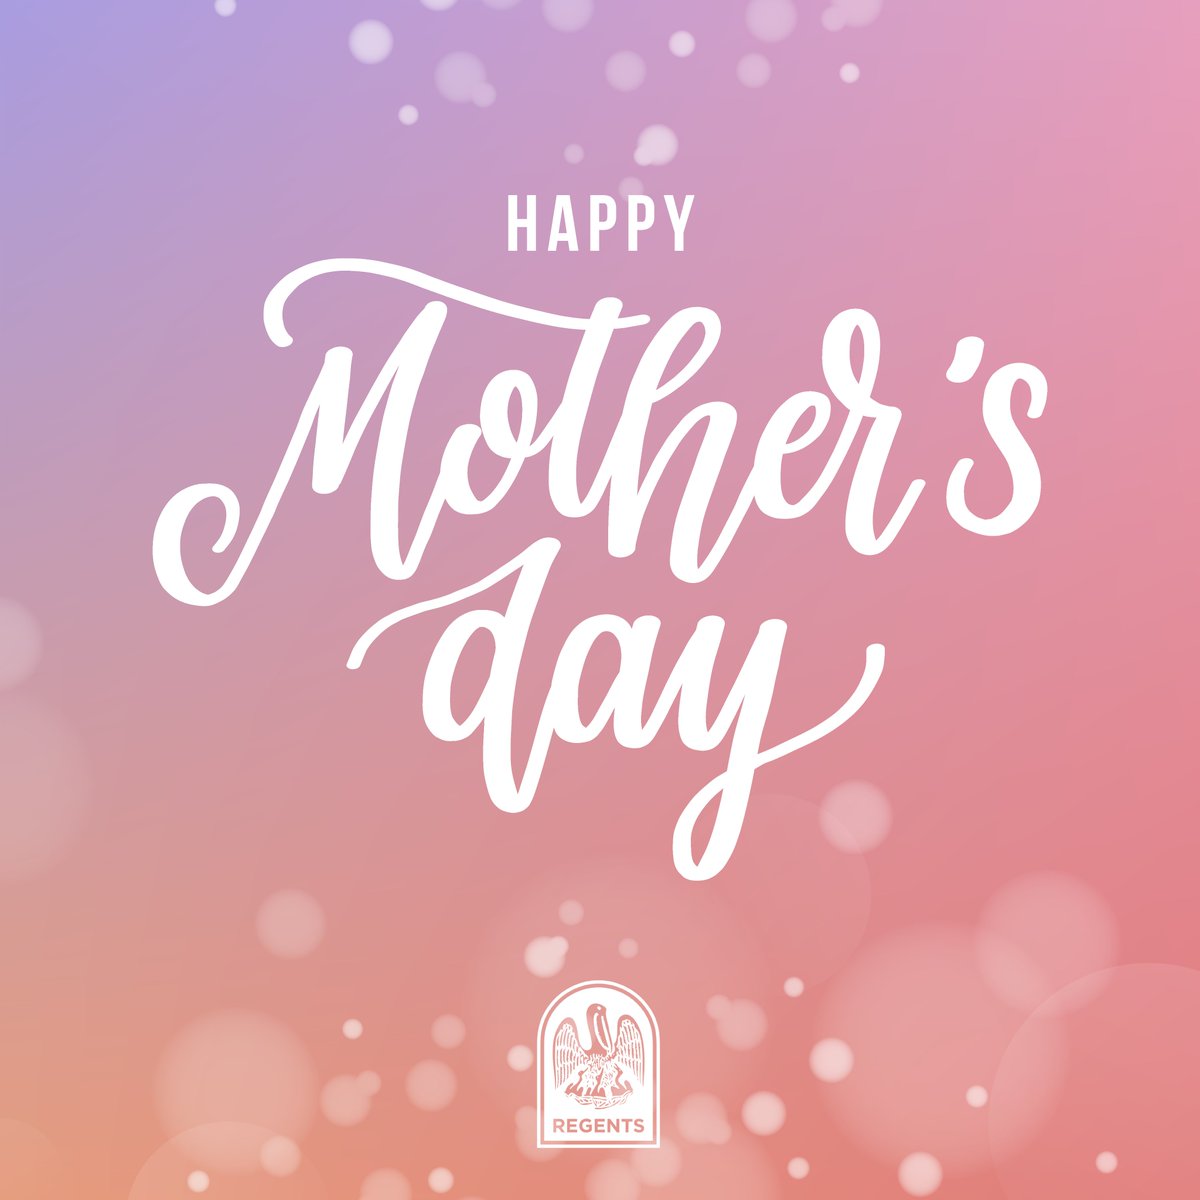 Thank you, mom! #HappyMothersDay